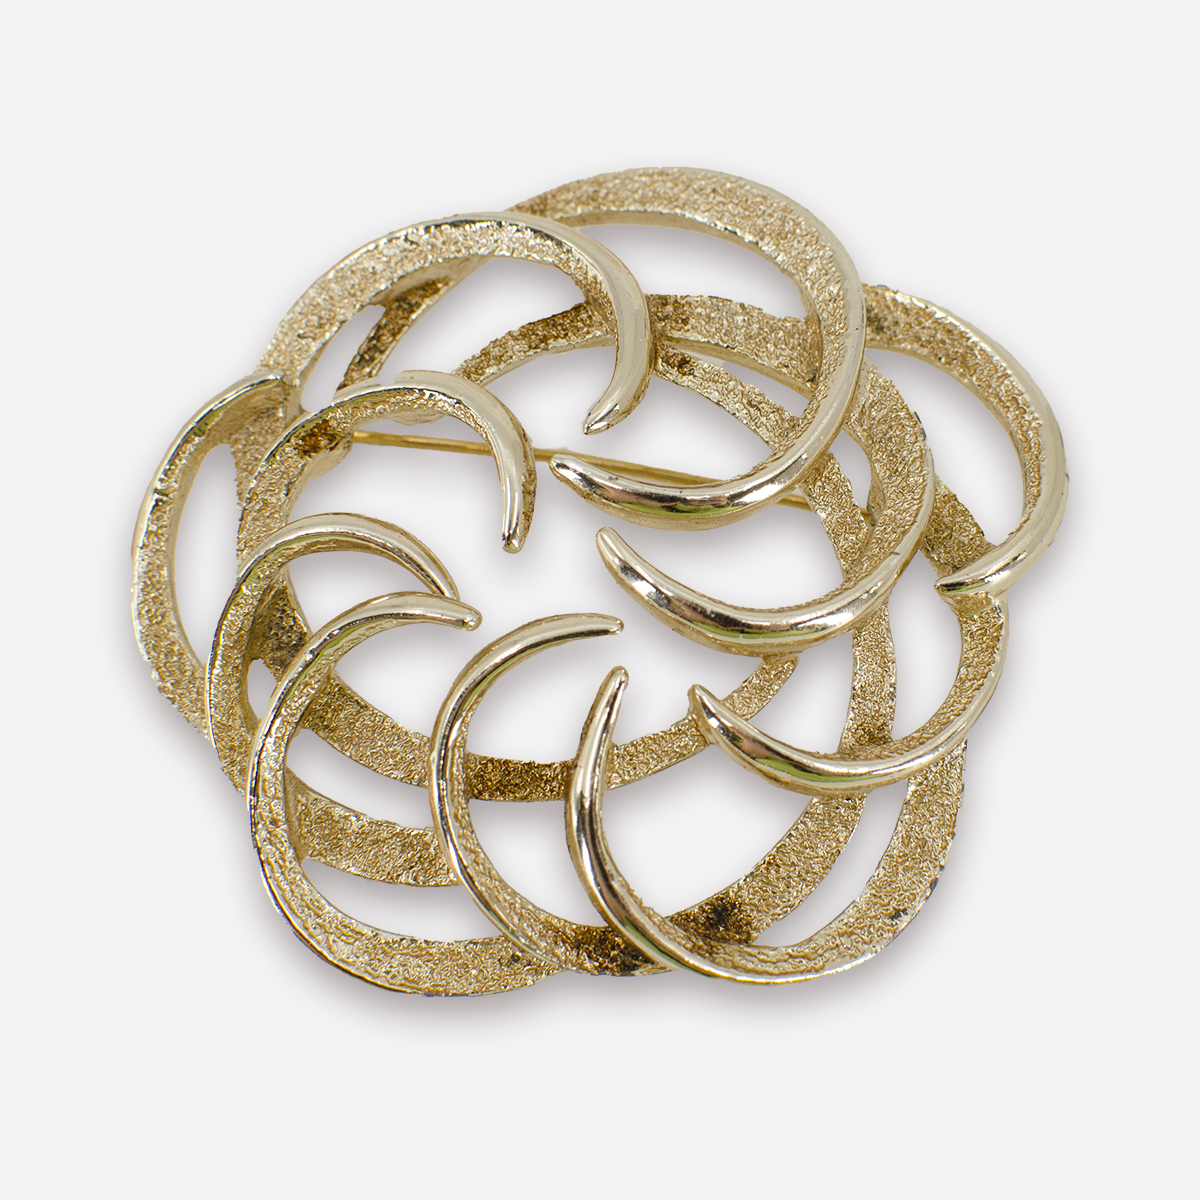 Gold Sarah coventry brooch